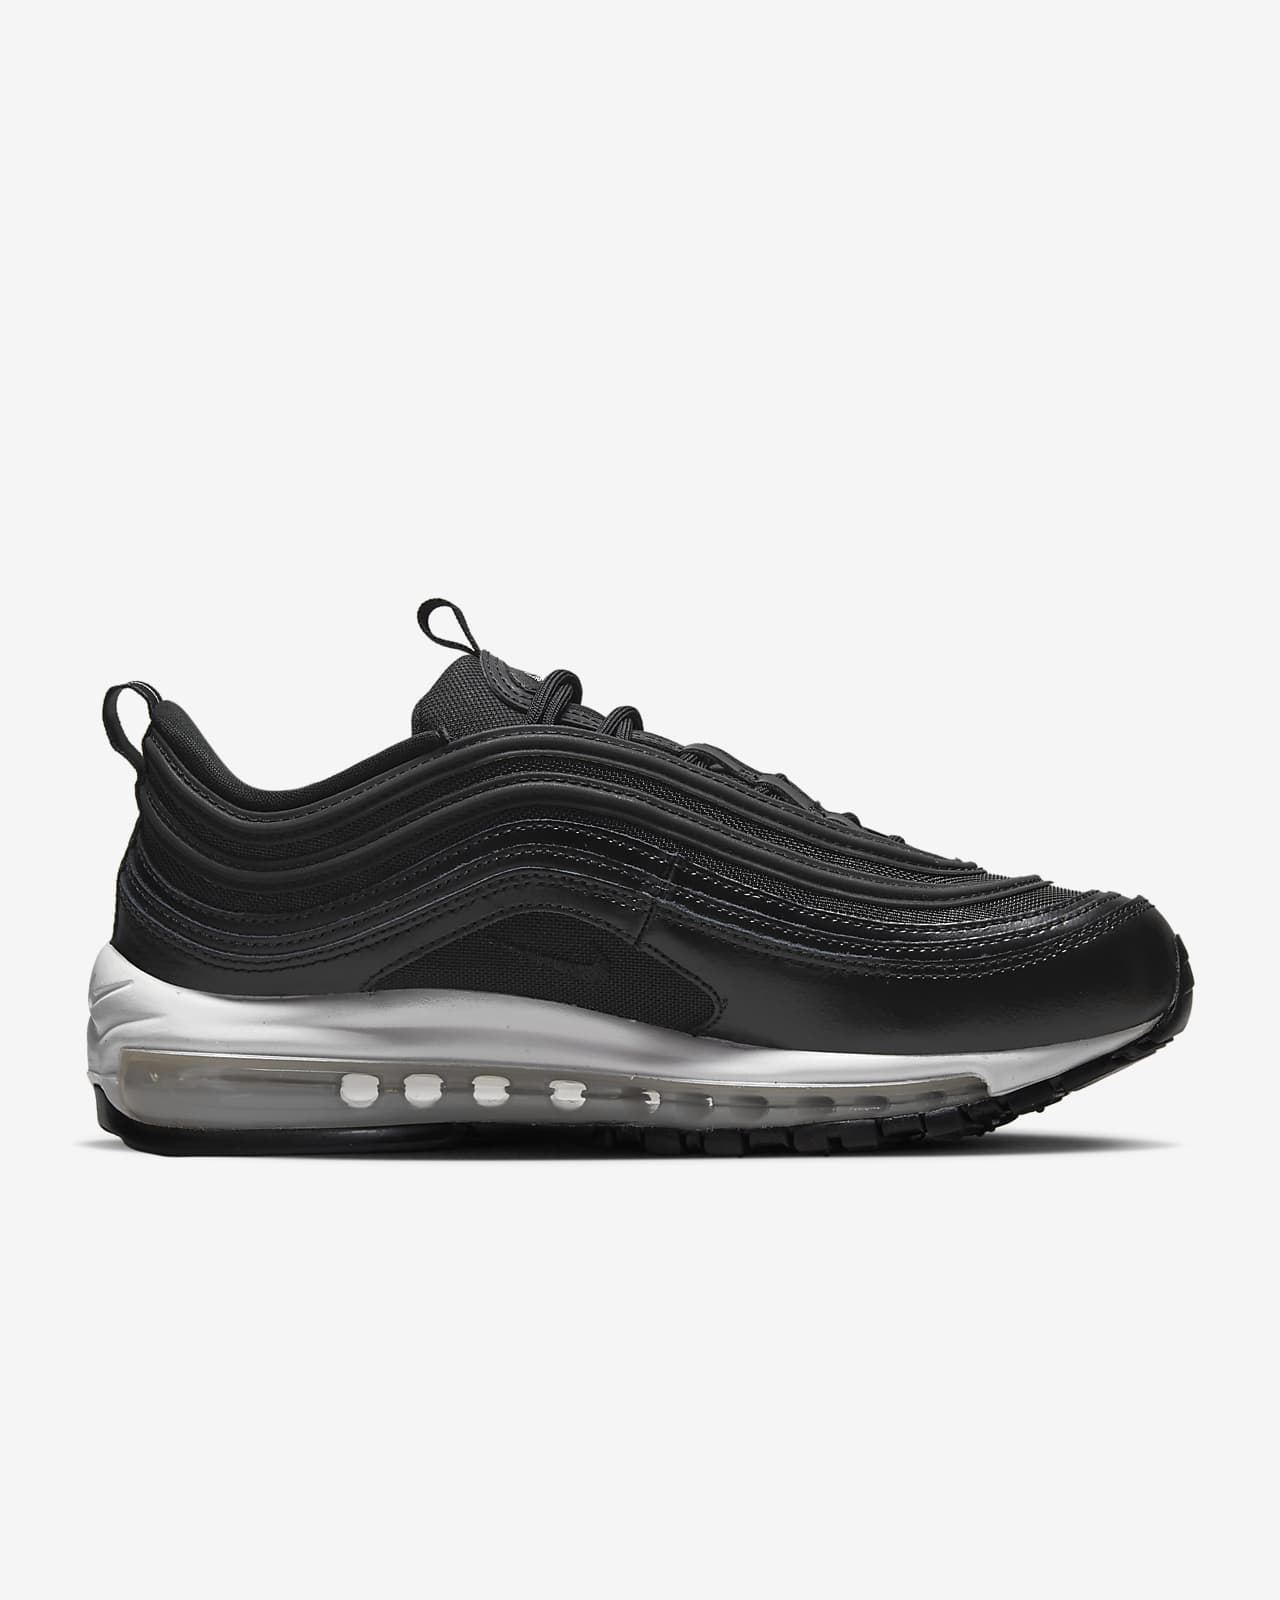 Chaussures Nike Air Max 97 pour Femme – DX0137